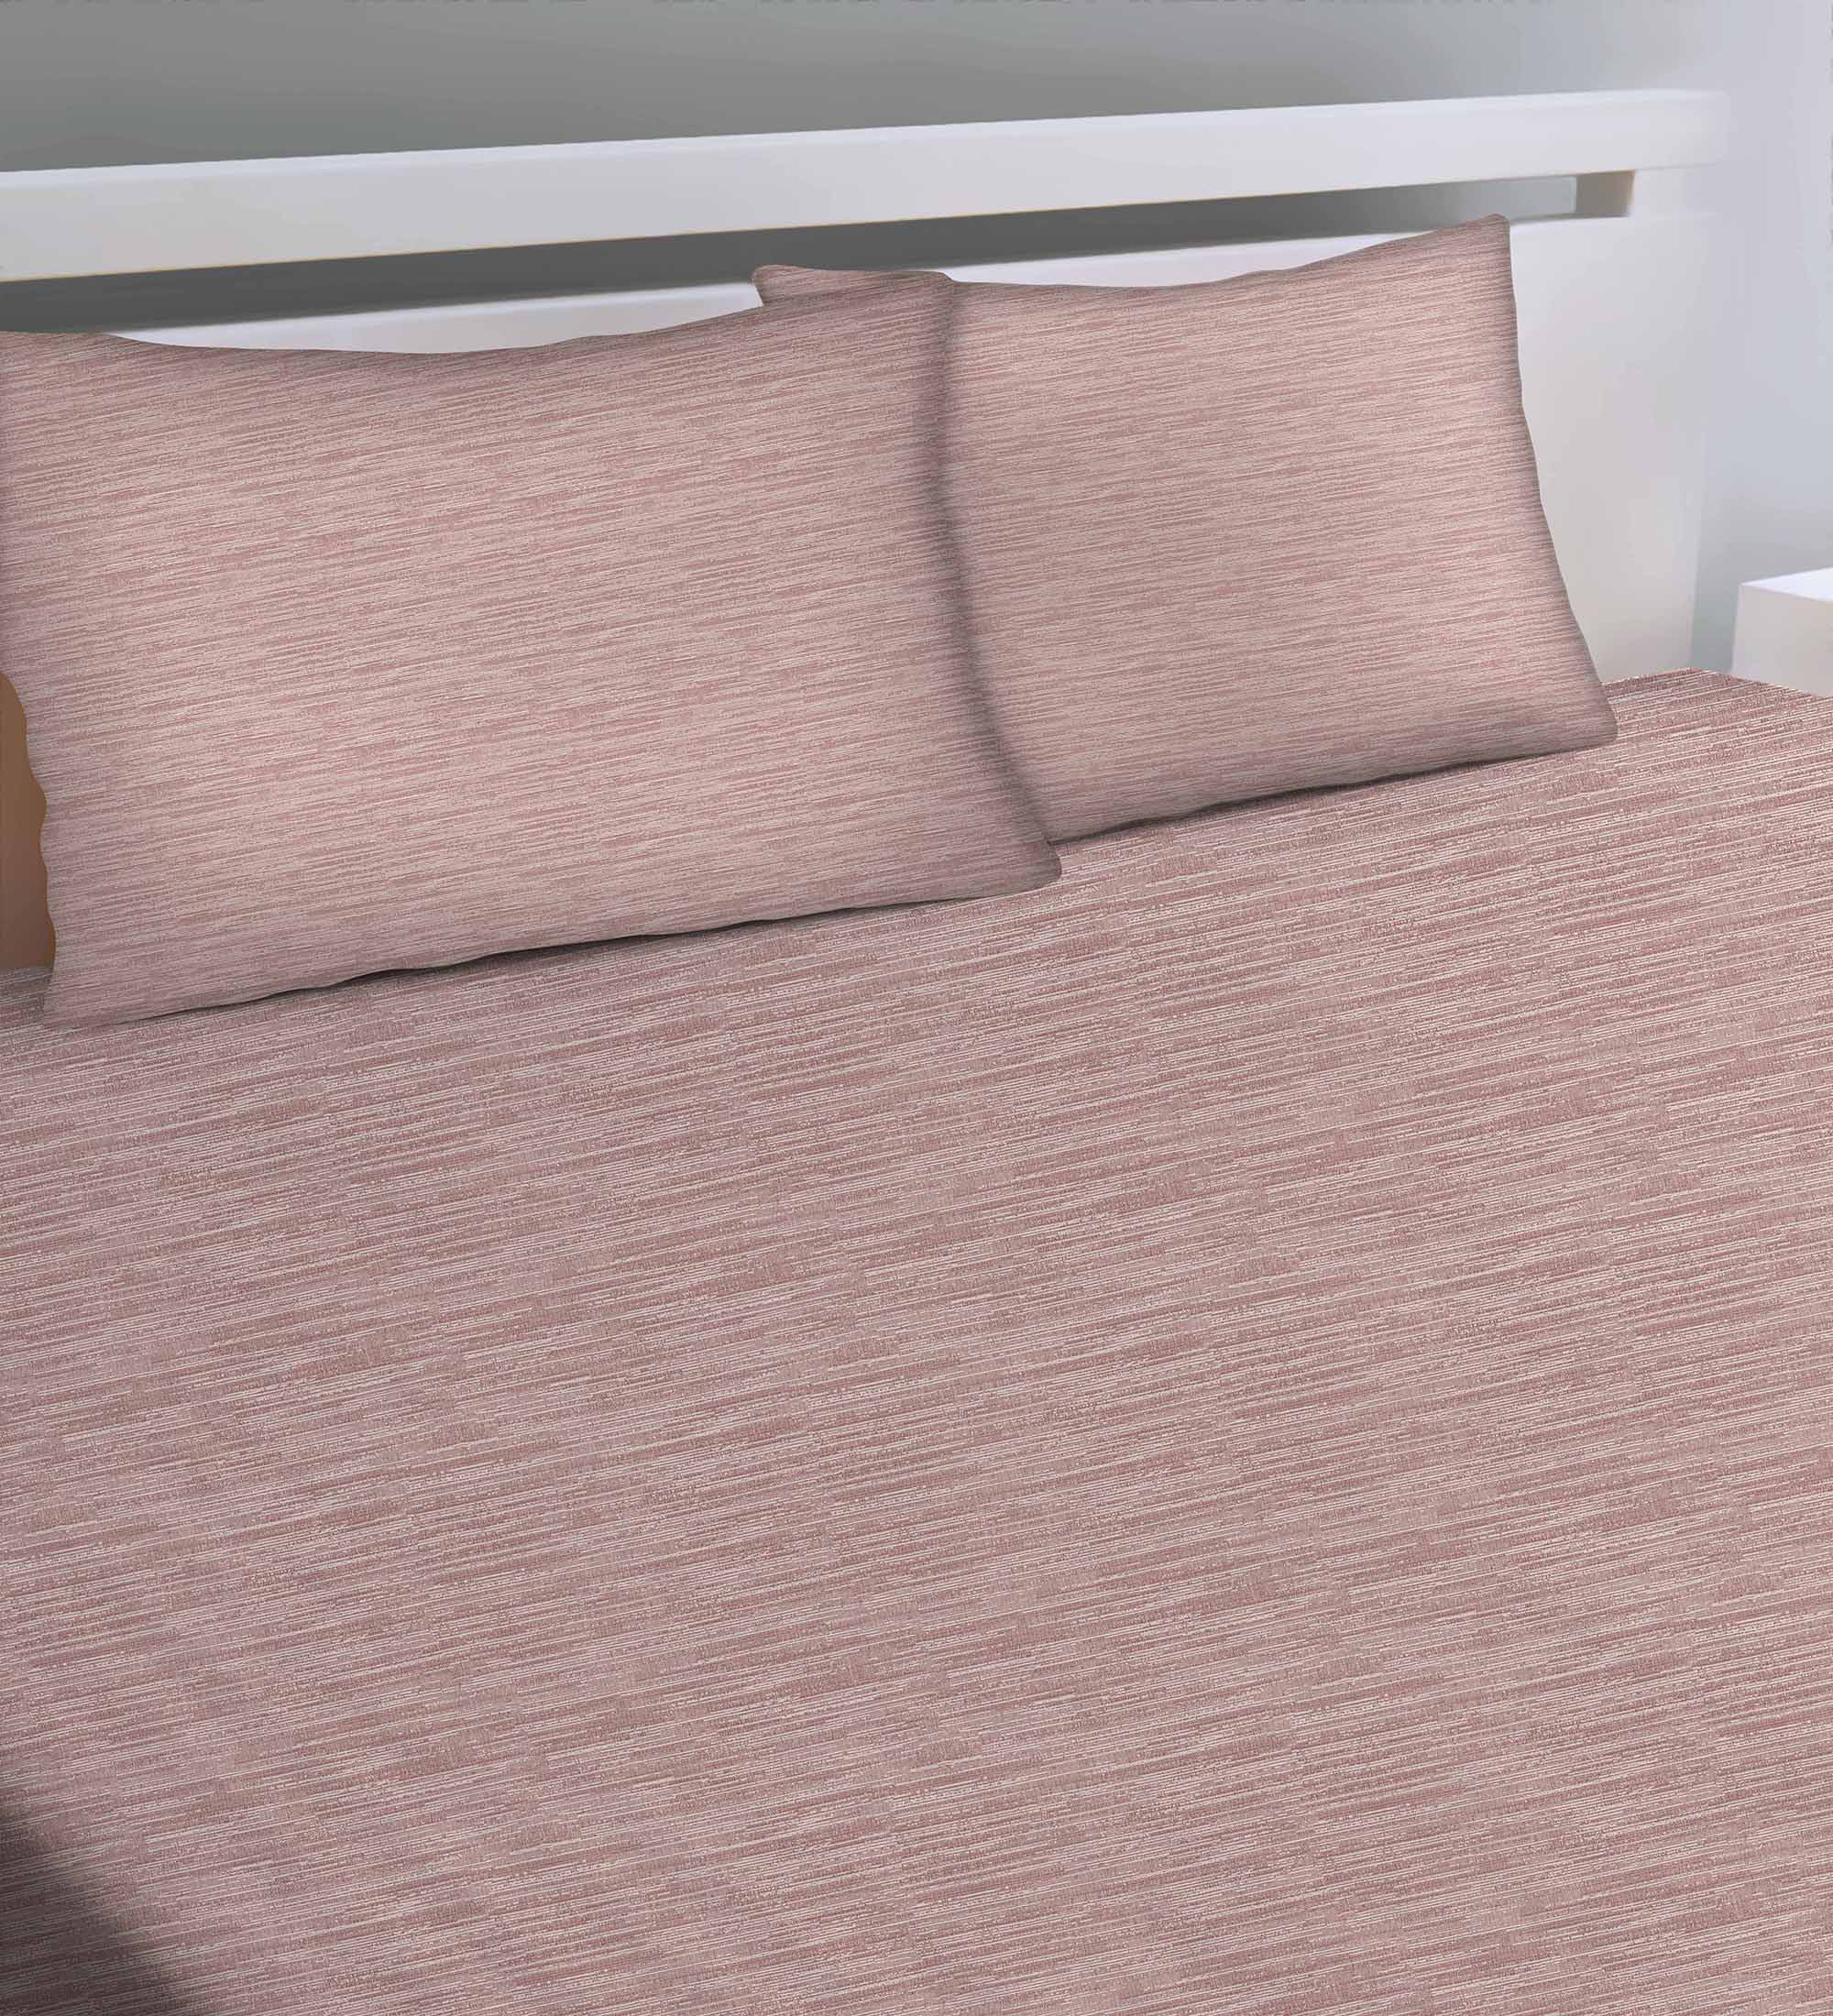 Petra Babypink Bedcover for Double Bed with 2 PillowCovers King Size (104" X 90")